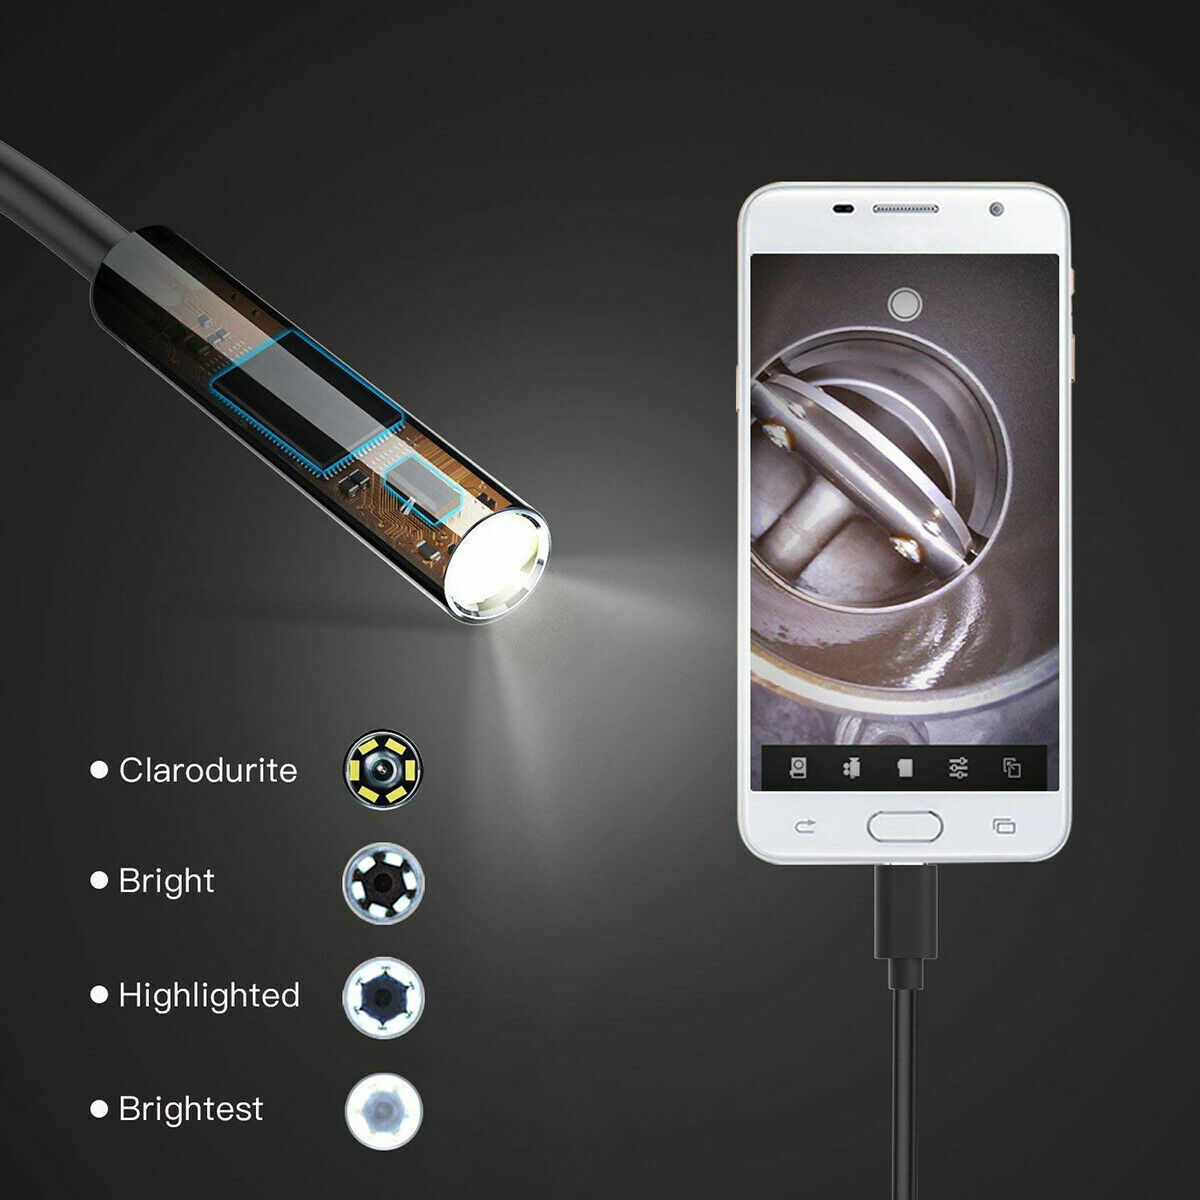 Megapixels HD USB C Endoscope Type C Borescope Inspection Camera for Android